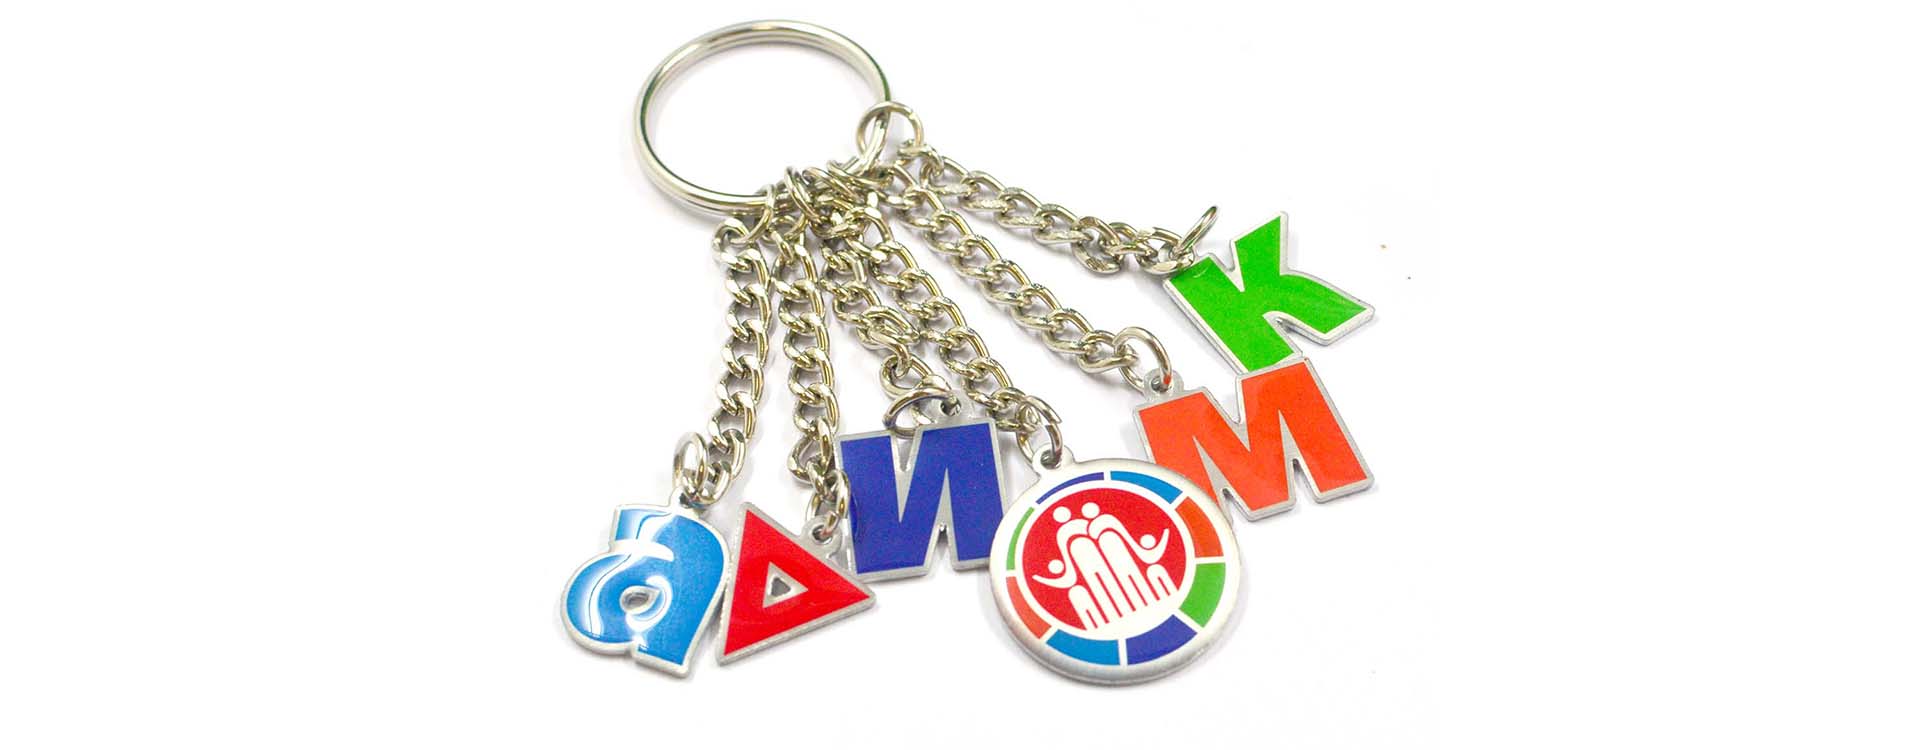 ArtiGifts - Personalized Metal Keychains for Lasting Impressions